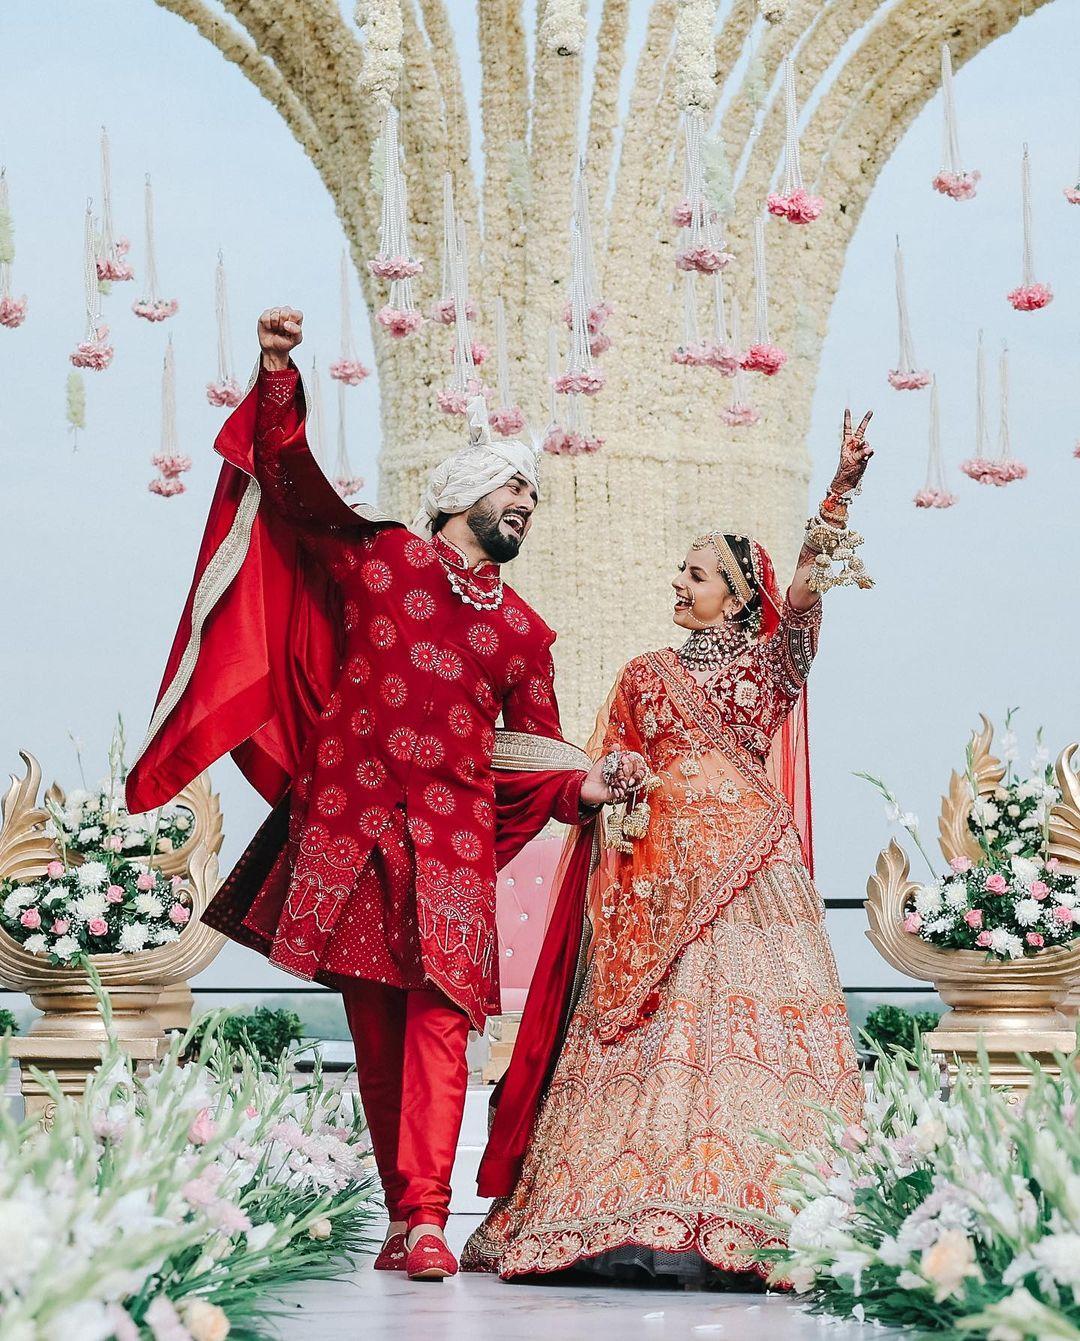 Shrenu Parikh and Akshay Mhatre tied the knot on December 21st. They have previously worked together in 'Ghar ek Mandir.' The actress has just shared some beautiful pictures from their dreamy wedding ceremony